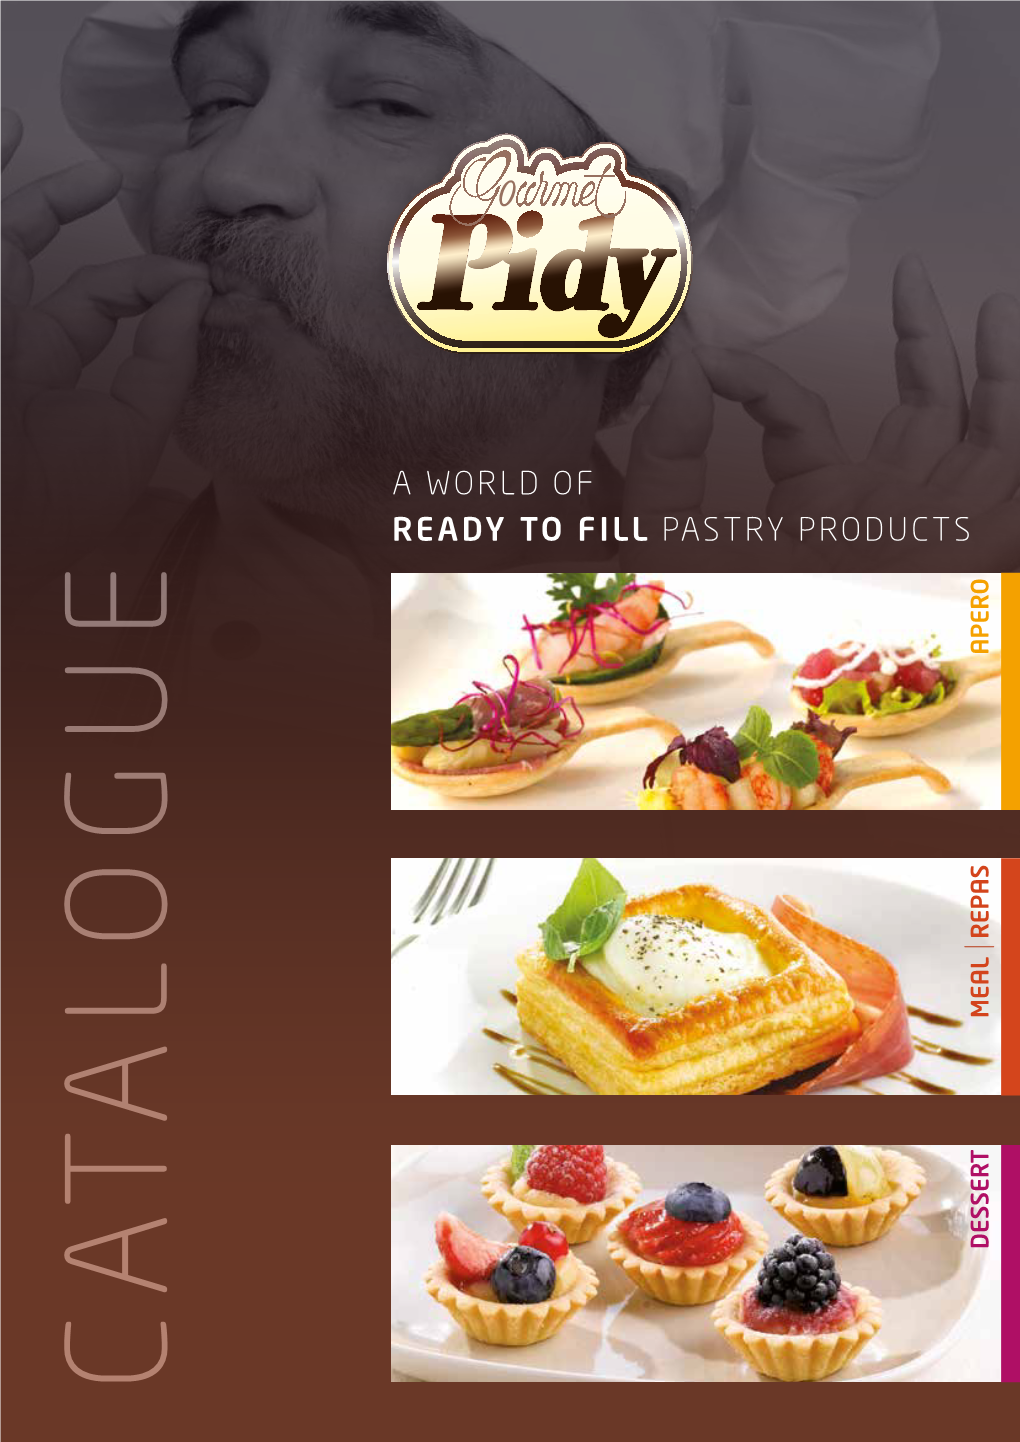 A World of Ready to Fill Pastry Products Apero Meal Repas Dessert Catalogue Content